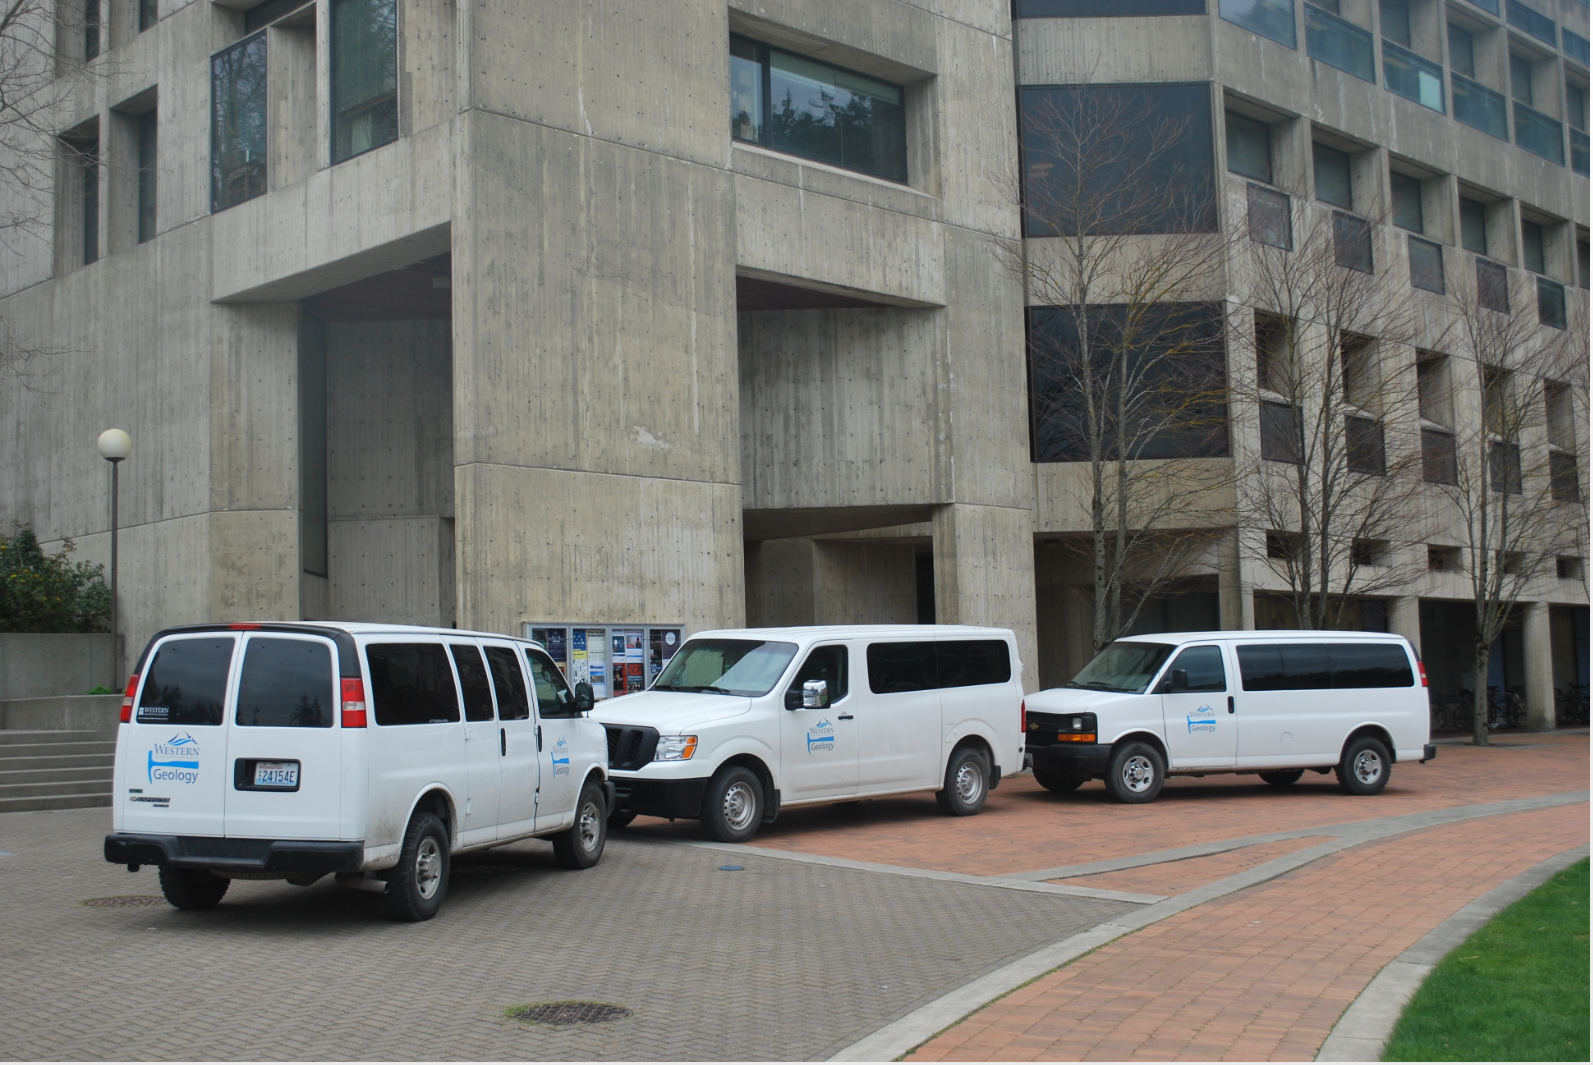 Three white Geology-branded vans parked outside the ES building